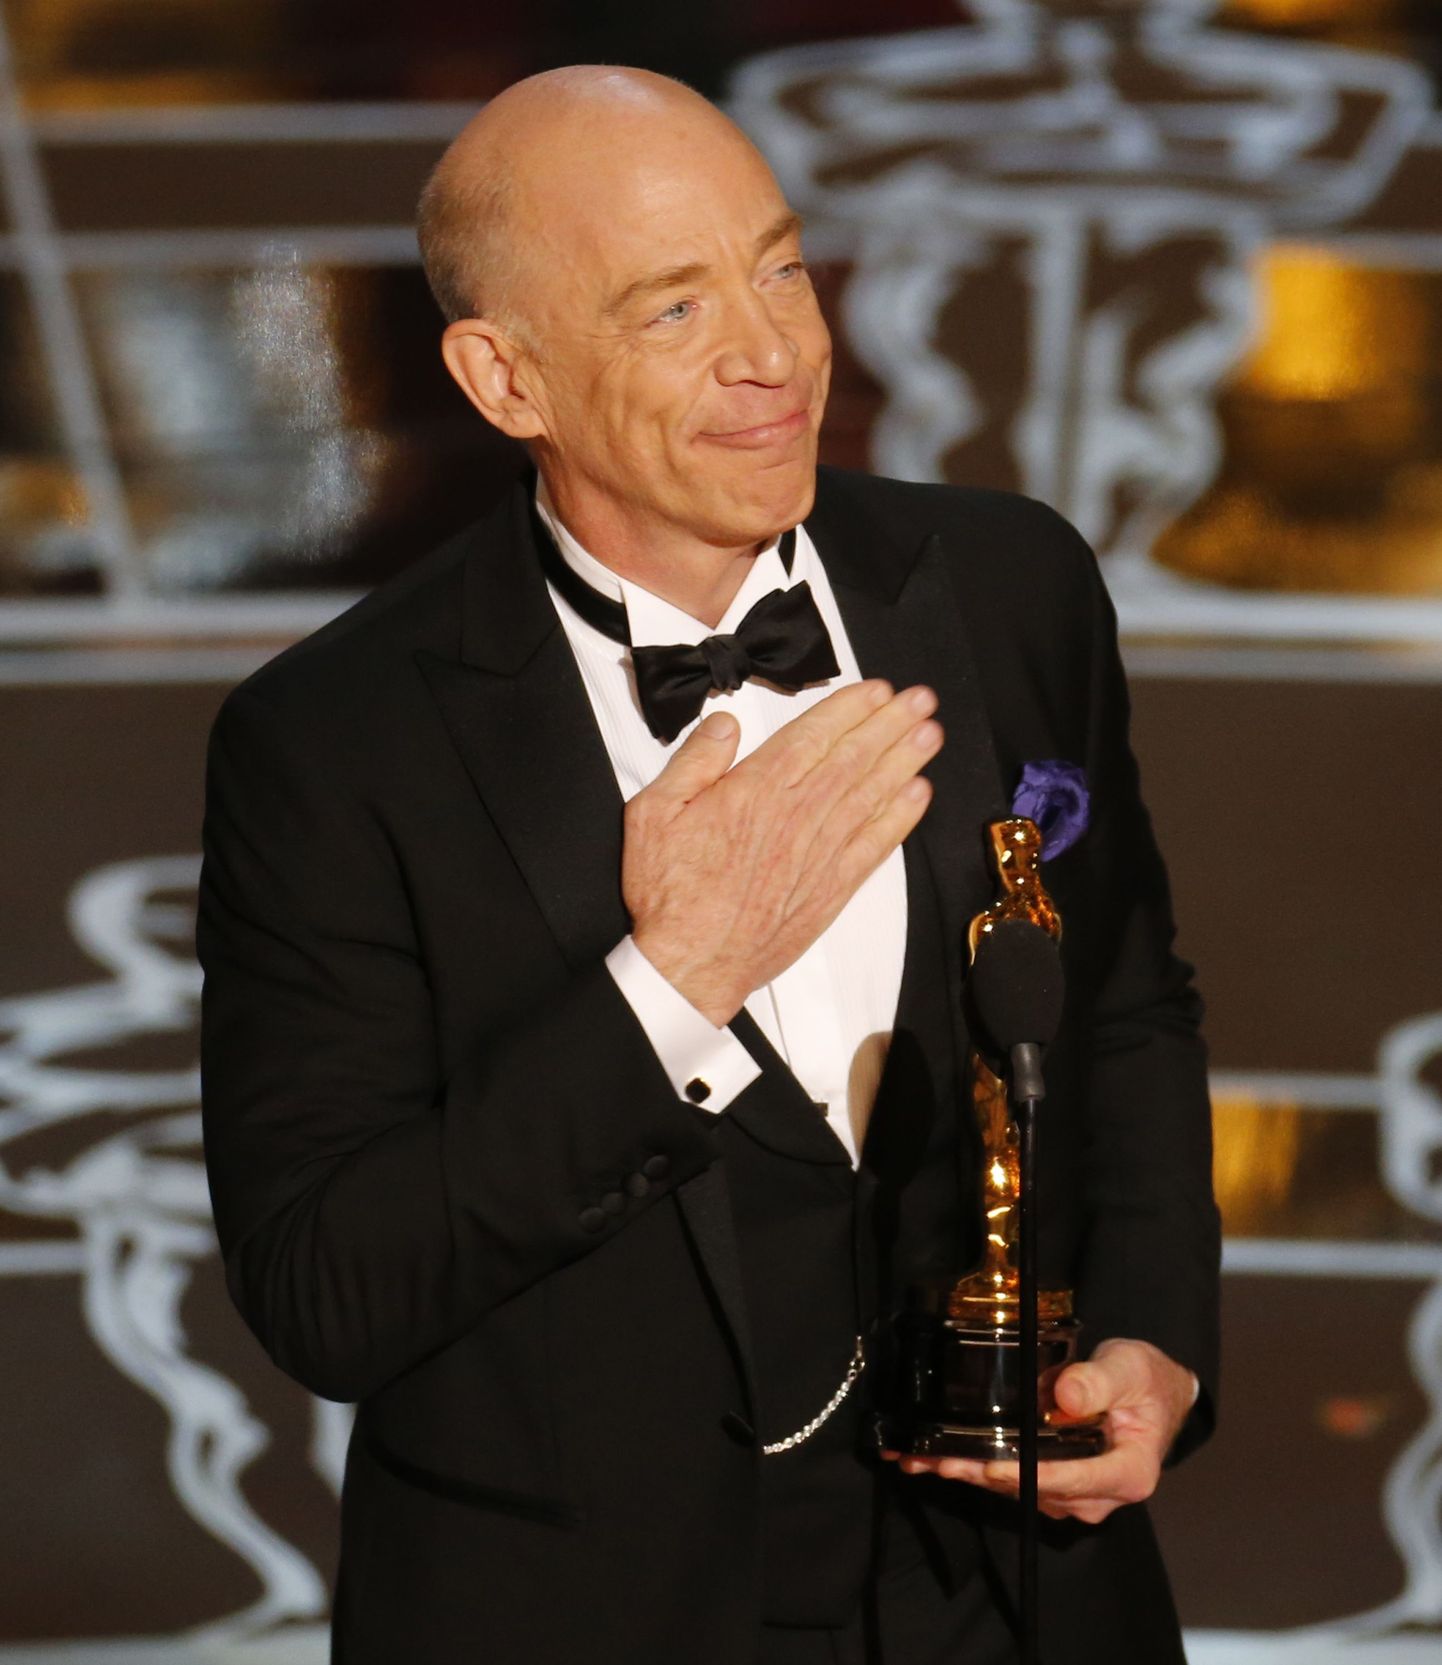 J.K. Simmons receives the Oscar for actor in a supporting role for "Whiplash" 
at the 87th Academy Awards in Hollywood, California February 22, 2015.  REUTERS/Mike Blake (UNITED STATES TAGS:ENTERTAINMENT) (OSCARS-SHOW)